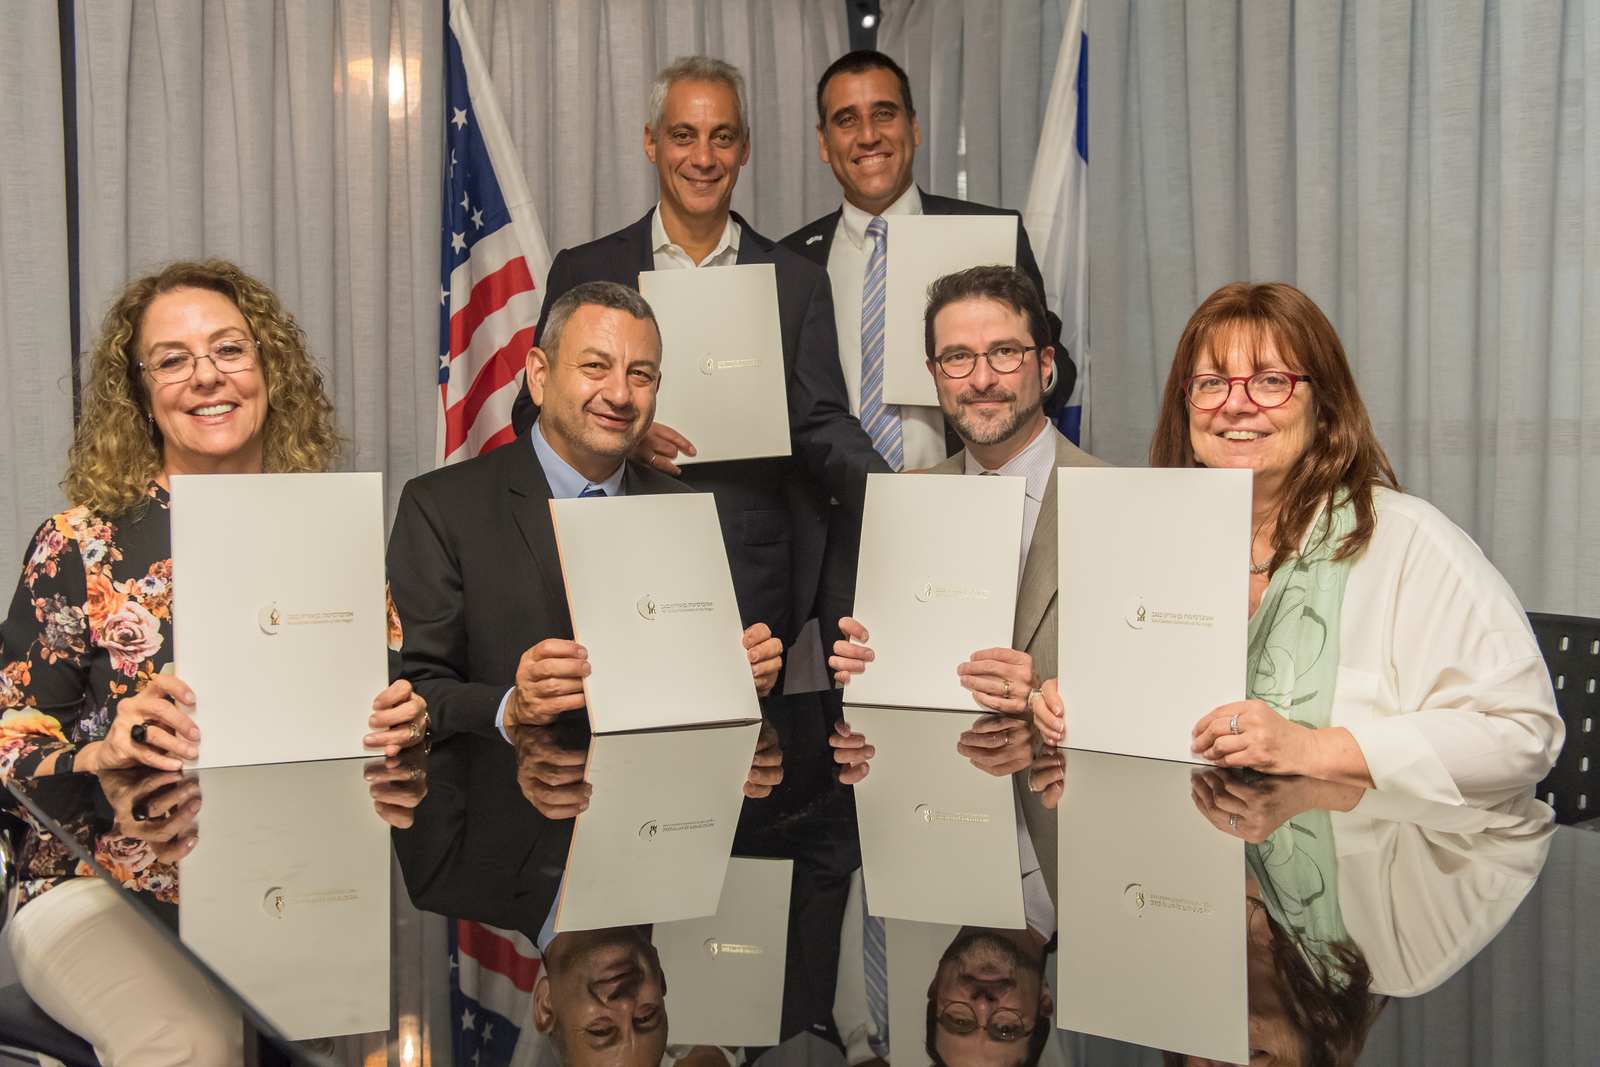 Chicago Mayor Rahm Emanuel (top left) and Aviv Ezra, consul general of Israel to the Midwest (top right) witnessed the signing. Left to right: BGU President Prof. Rivka Carmi; Prof. Dan Blumberg, BGU’s vice president and dean for research and development; Prof. Aaron Packman of NU’s Department of Civil and Environmental Engineering and director of the Center for Water Research; and Prof. Fruma Yehiely, NU associate vice president for research.